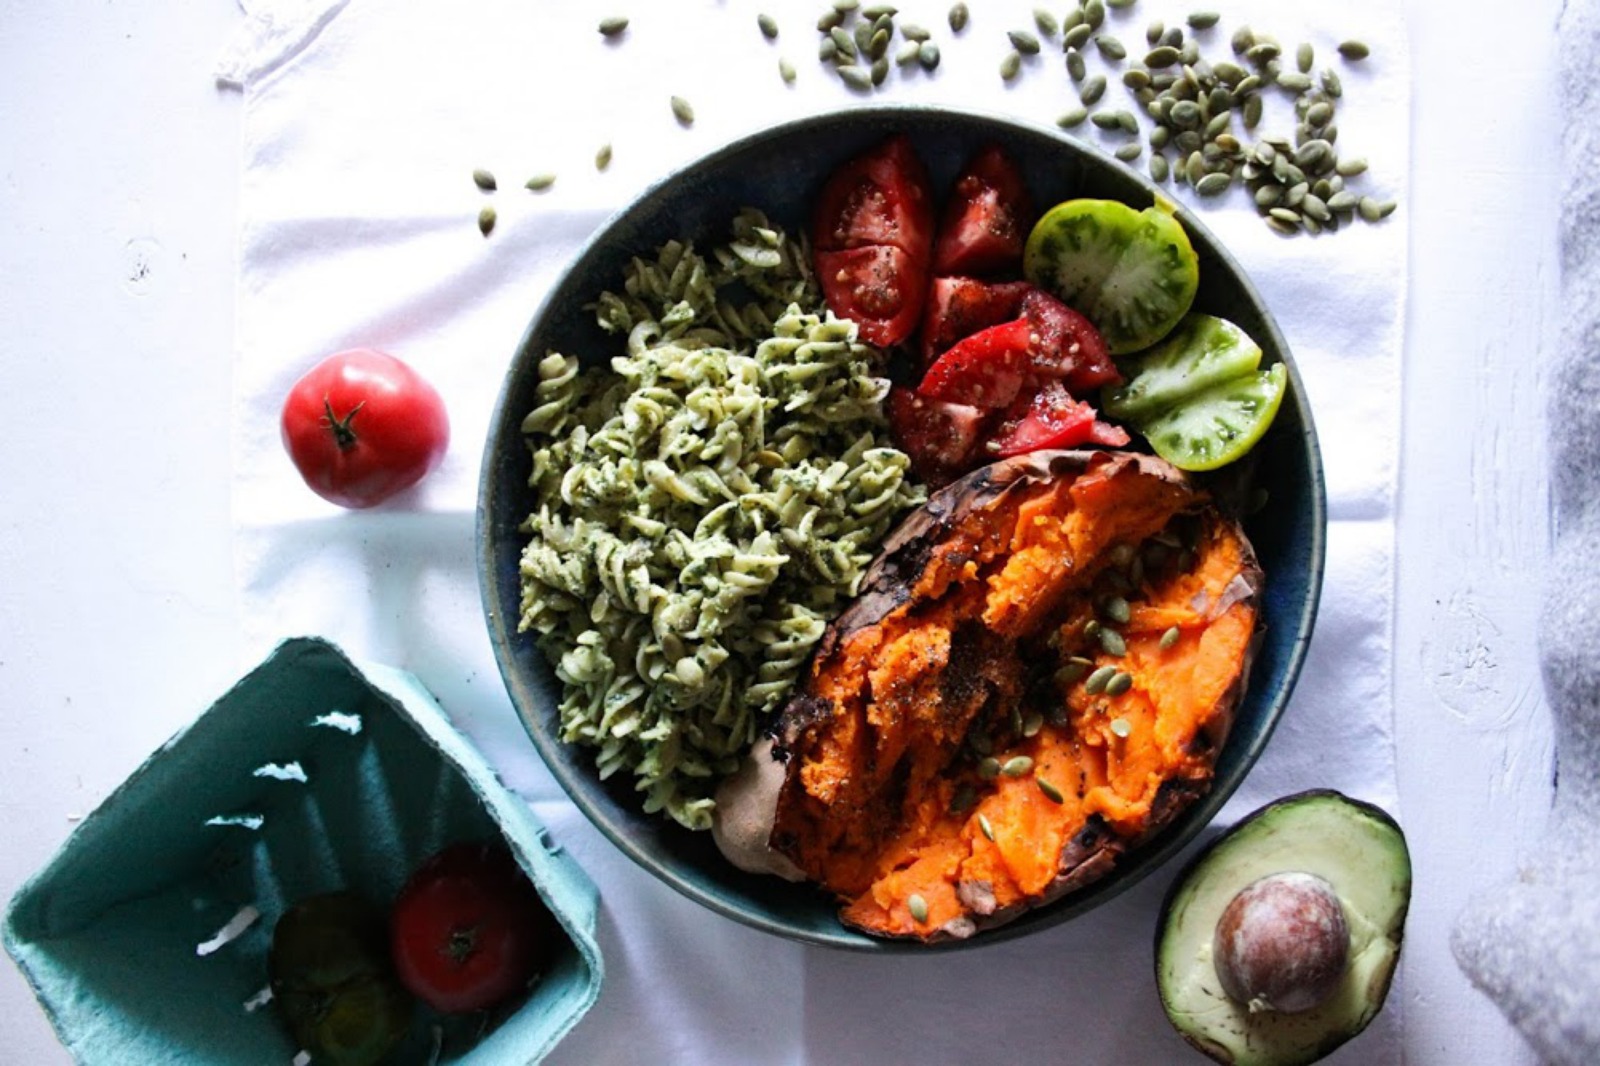 The Glow Bowl: Baked Sweet Potato With Pesto Pasta, Tomatoes and Pumpkin Seeds